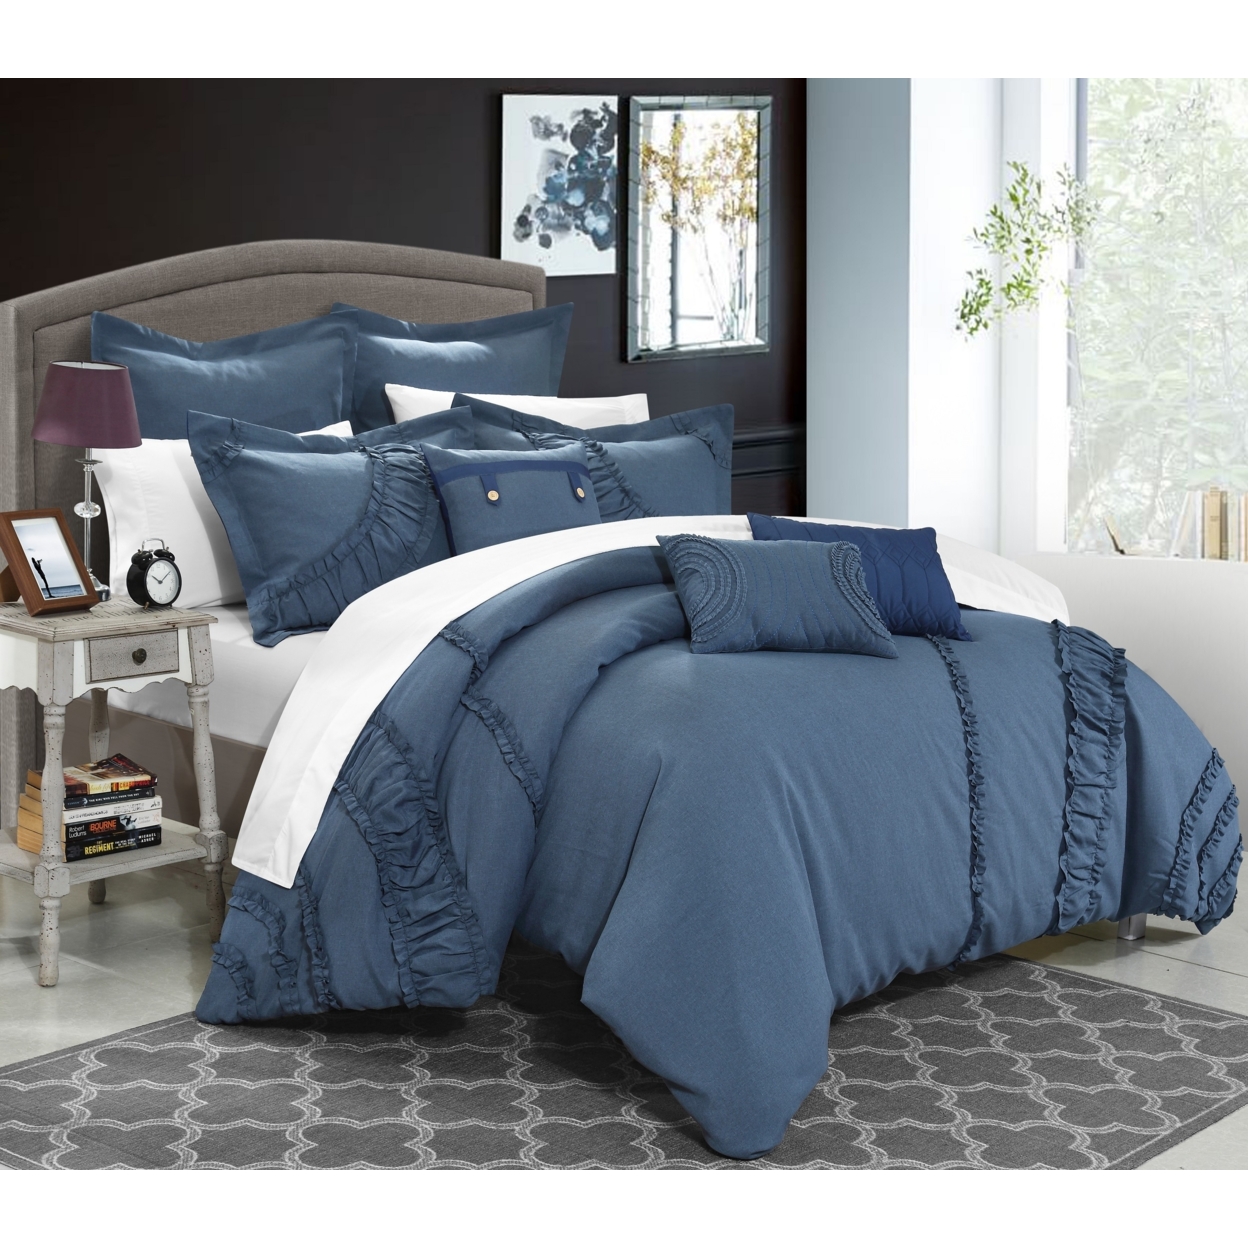 Chic Home 8 Piece Lucerne NEW FAUX LINEN FABRIC COLLECTION OVERSIZED AND OVERFILLED Embroidered Comforter Set - Blue, Queen